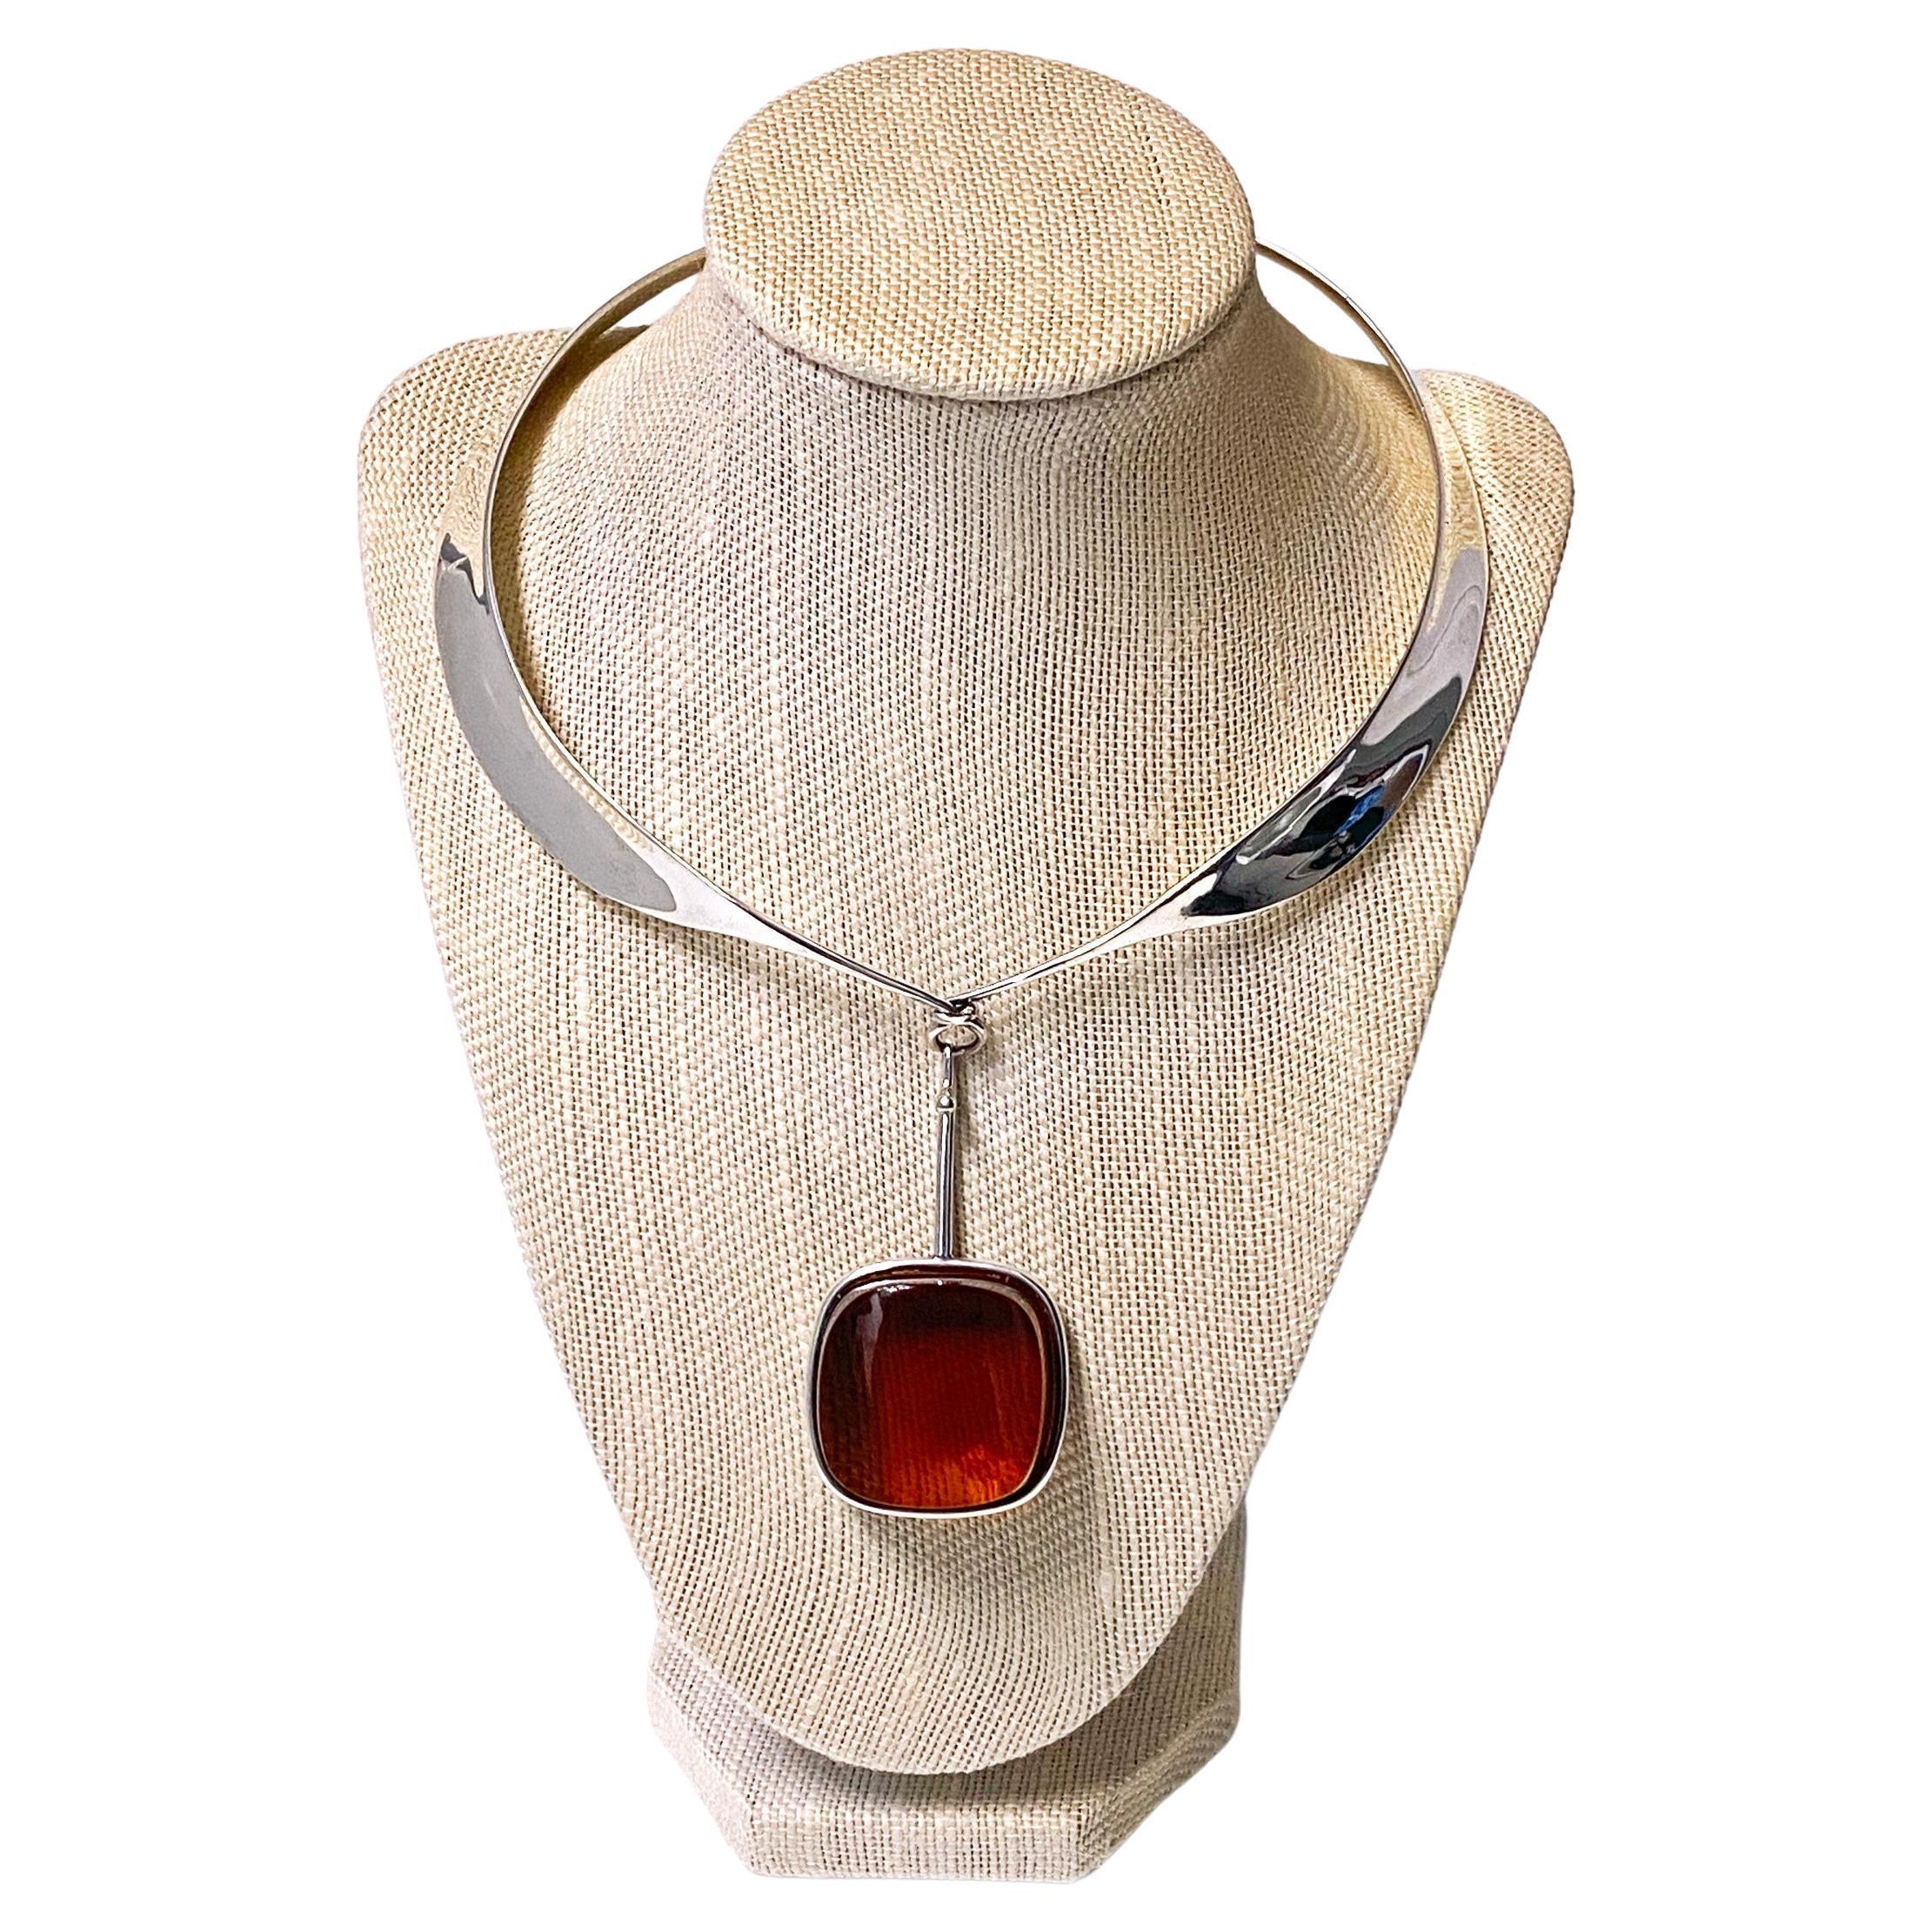 Vivianna Torun Bulow Hube for George Jensen, a rare silver orange brown rock crystal pendant on collar, Denmark, C. 1969, #160, stamped Georg Jensen in a dotted oval, Denmark, Torun, 160 and 925S. Will fit up to 19-inch neck, pendant drop 2.9